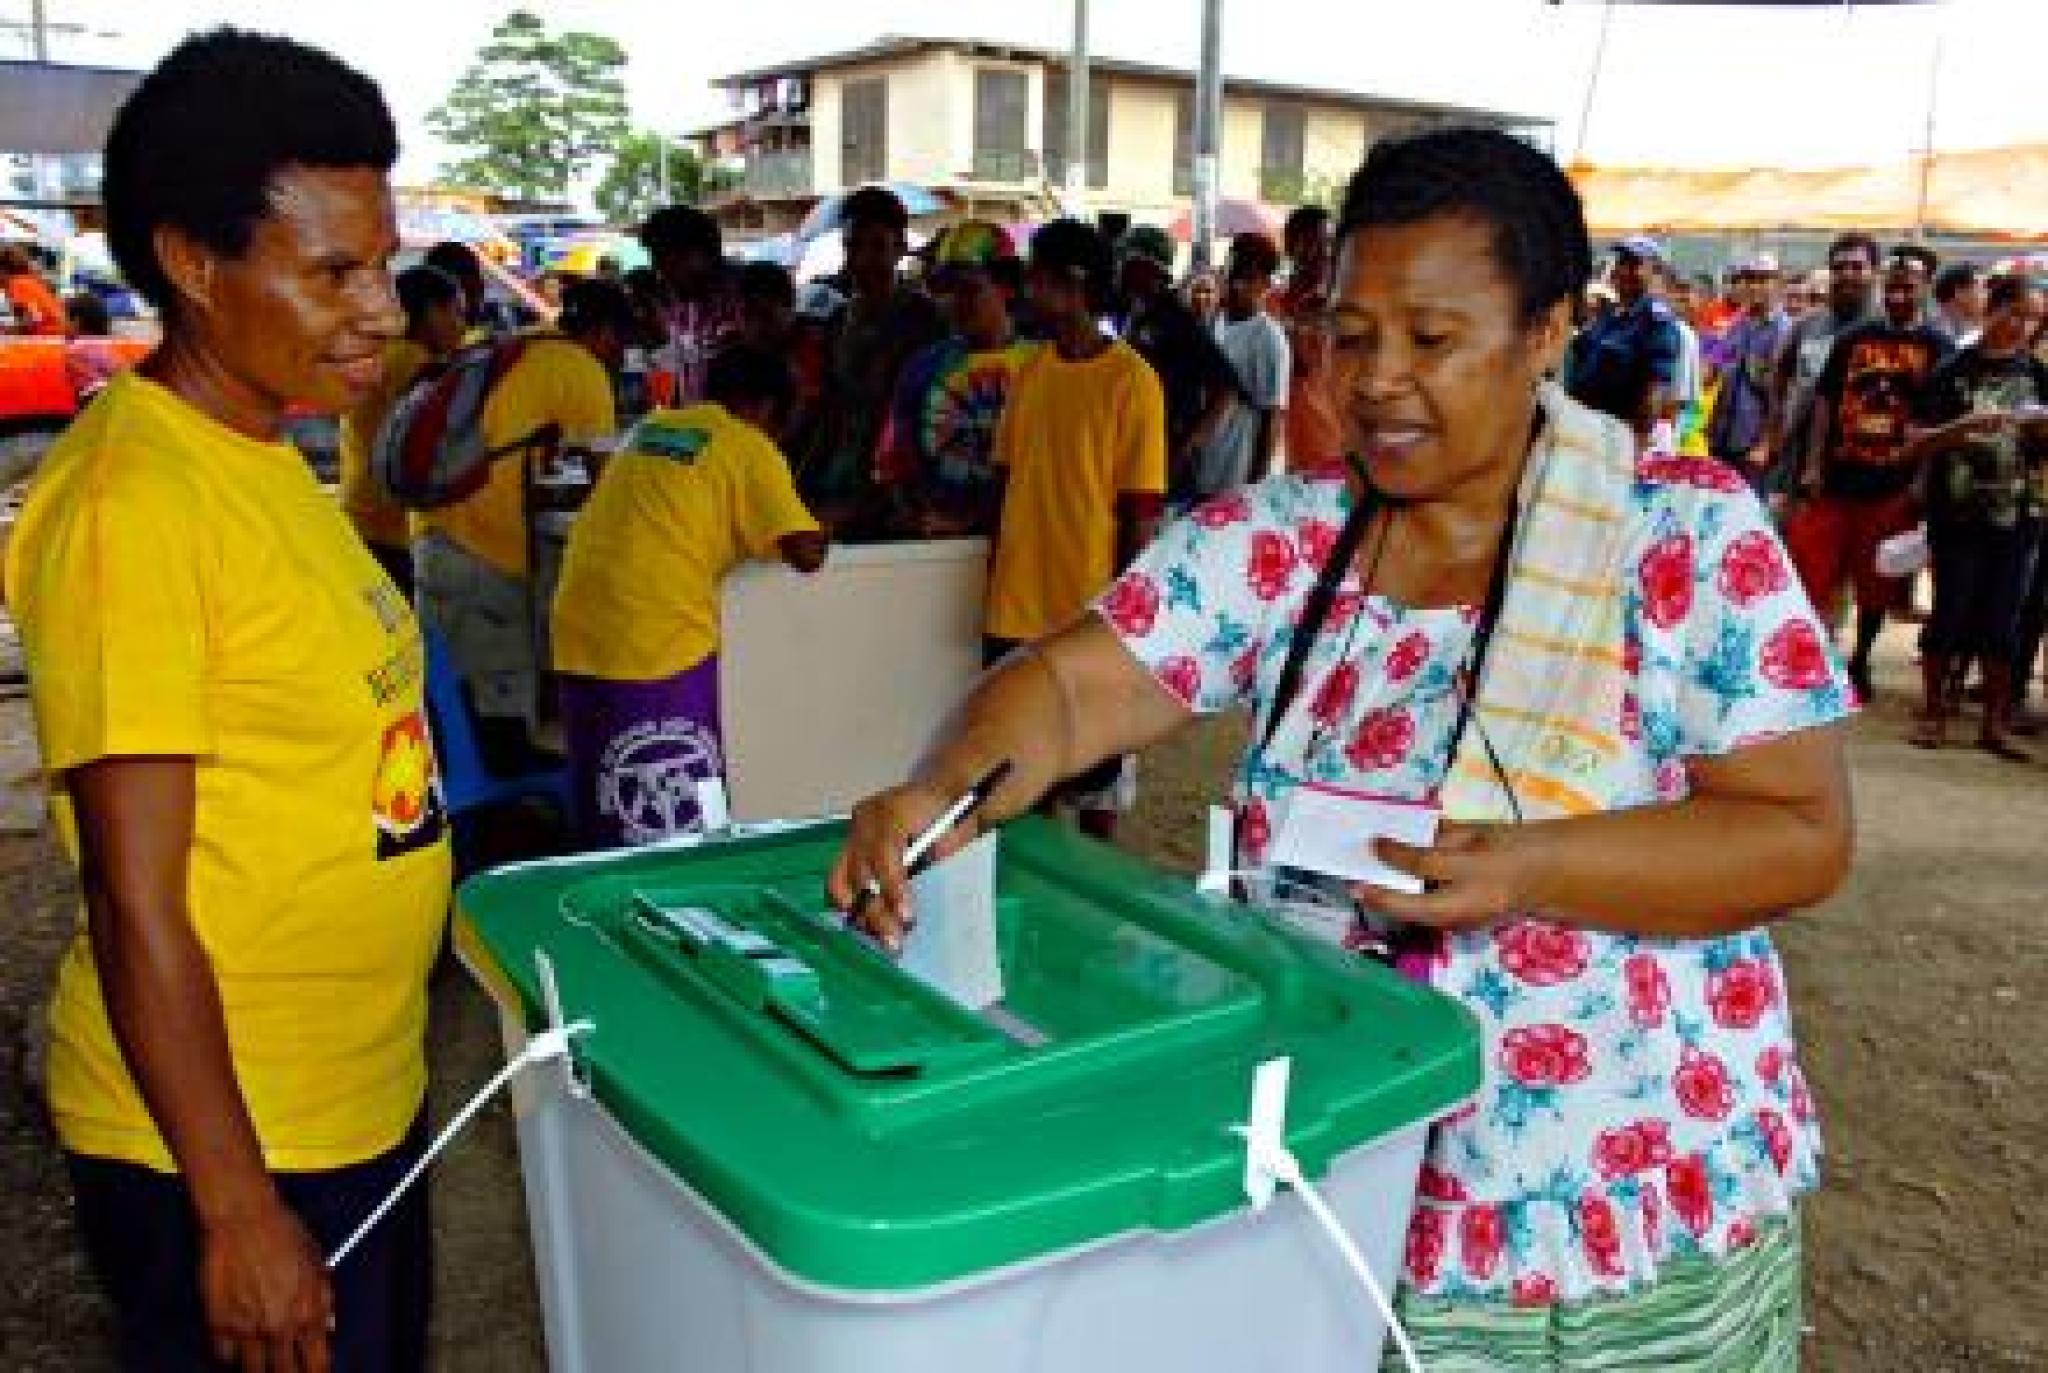 Image of PNG elections by Commonwealth Secretariat on Flickr (CC BY-NC-ND 2.0)